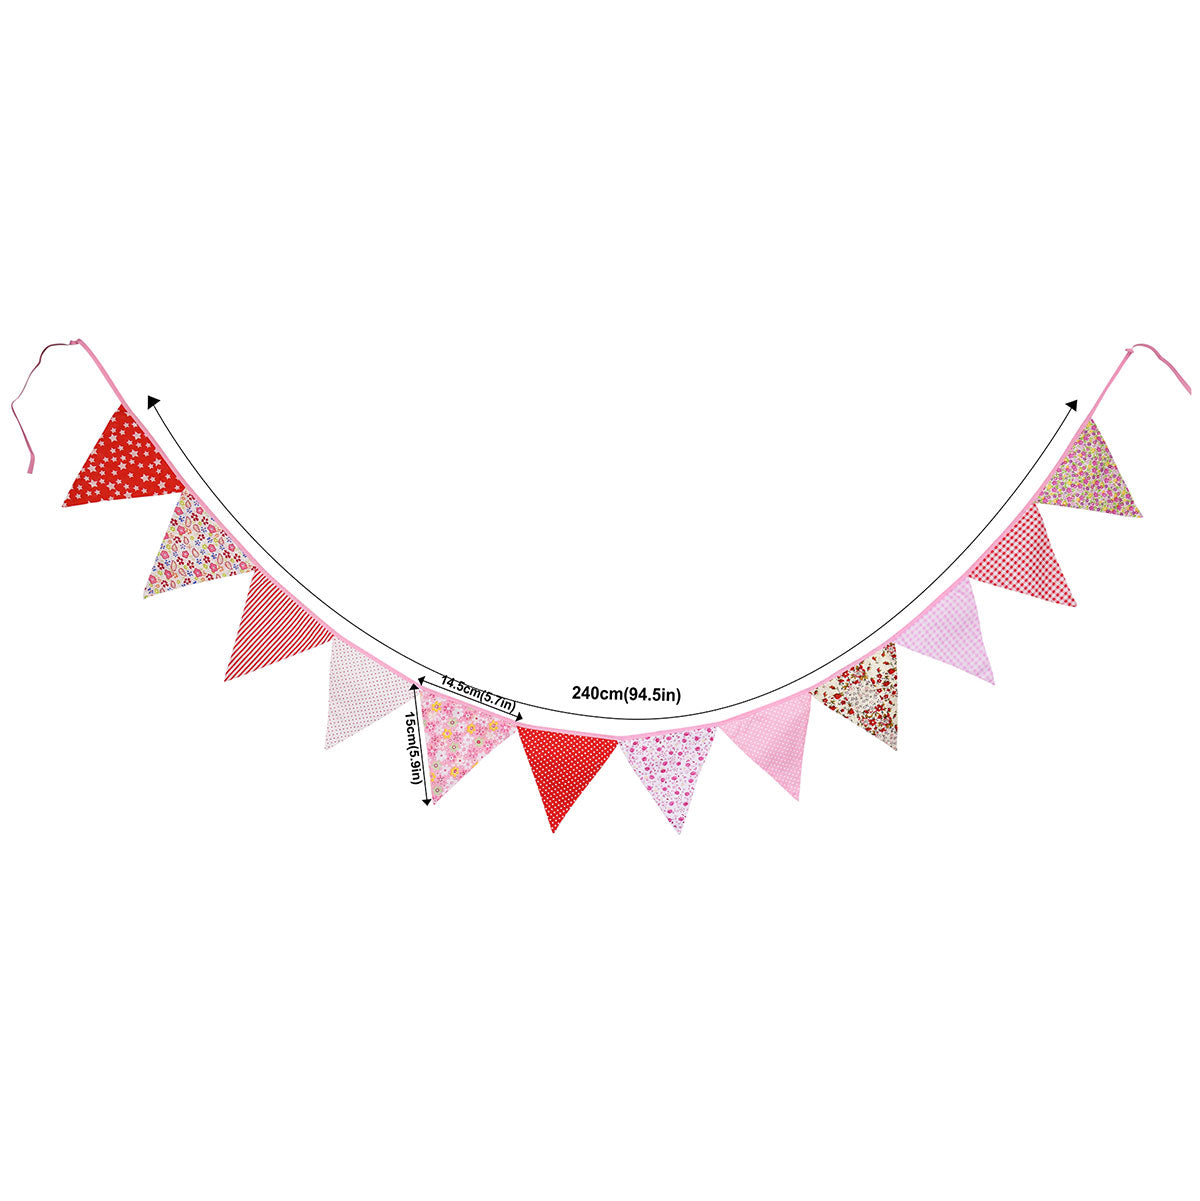 2 Pink Cotton Pennant Banners